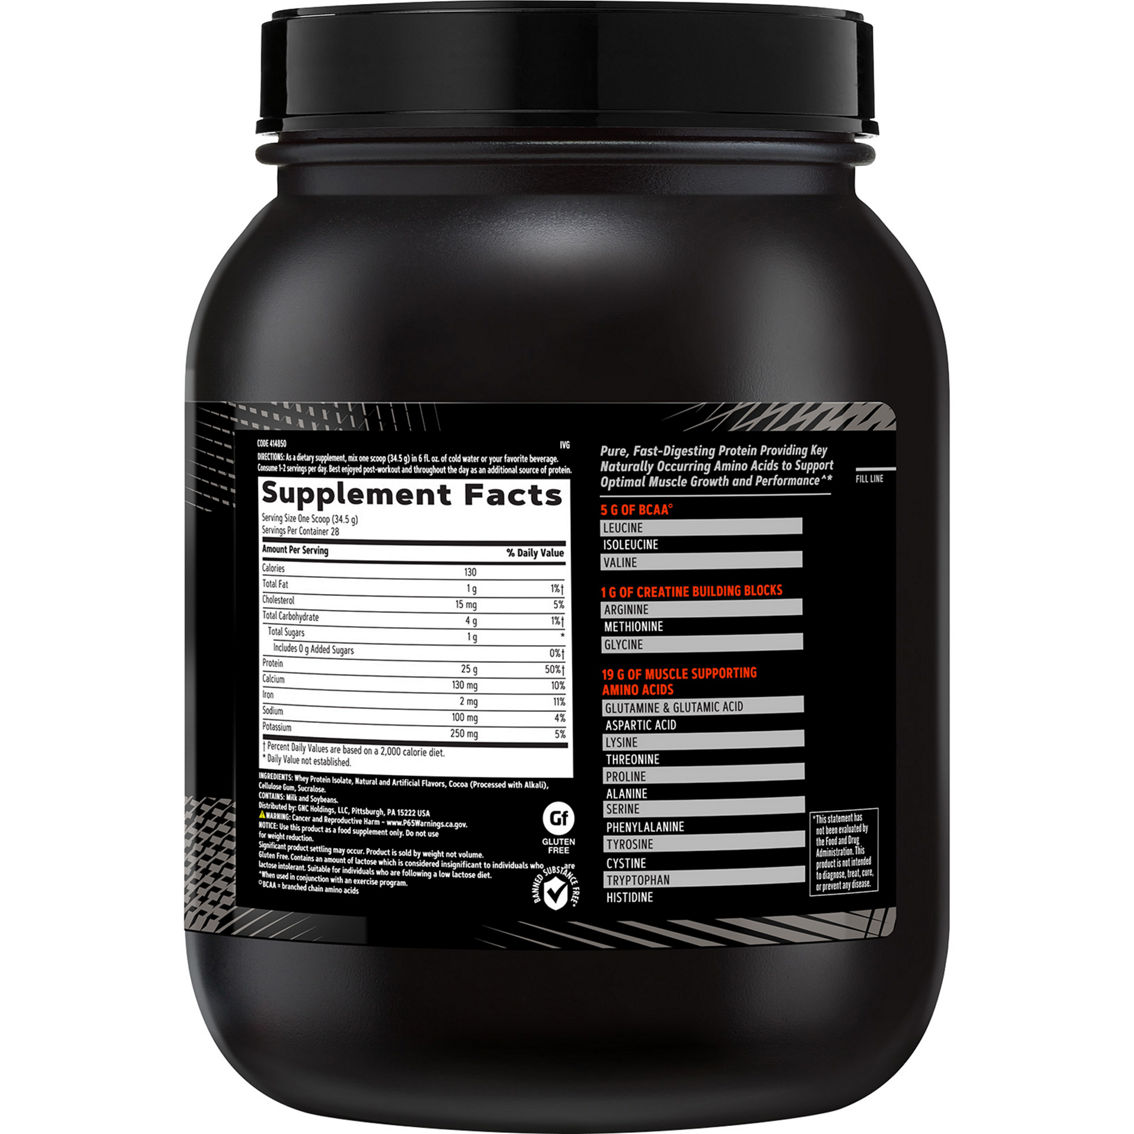 GNC AMP Pure Isolate - Image 2 of 2